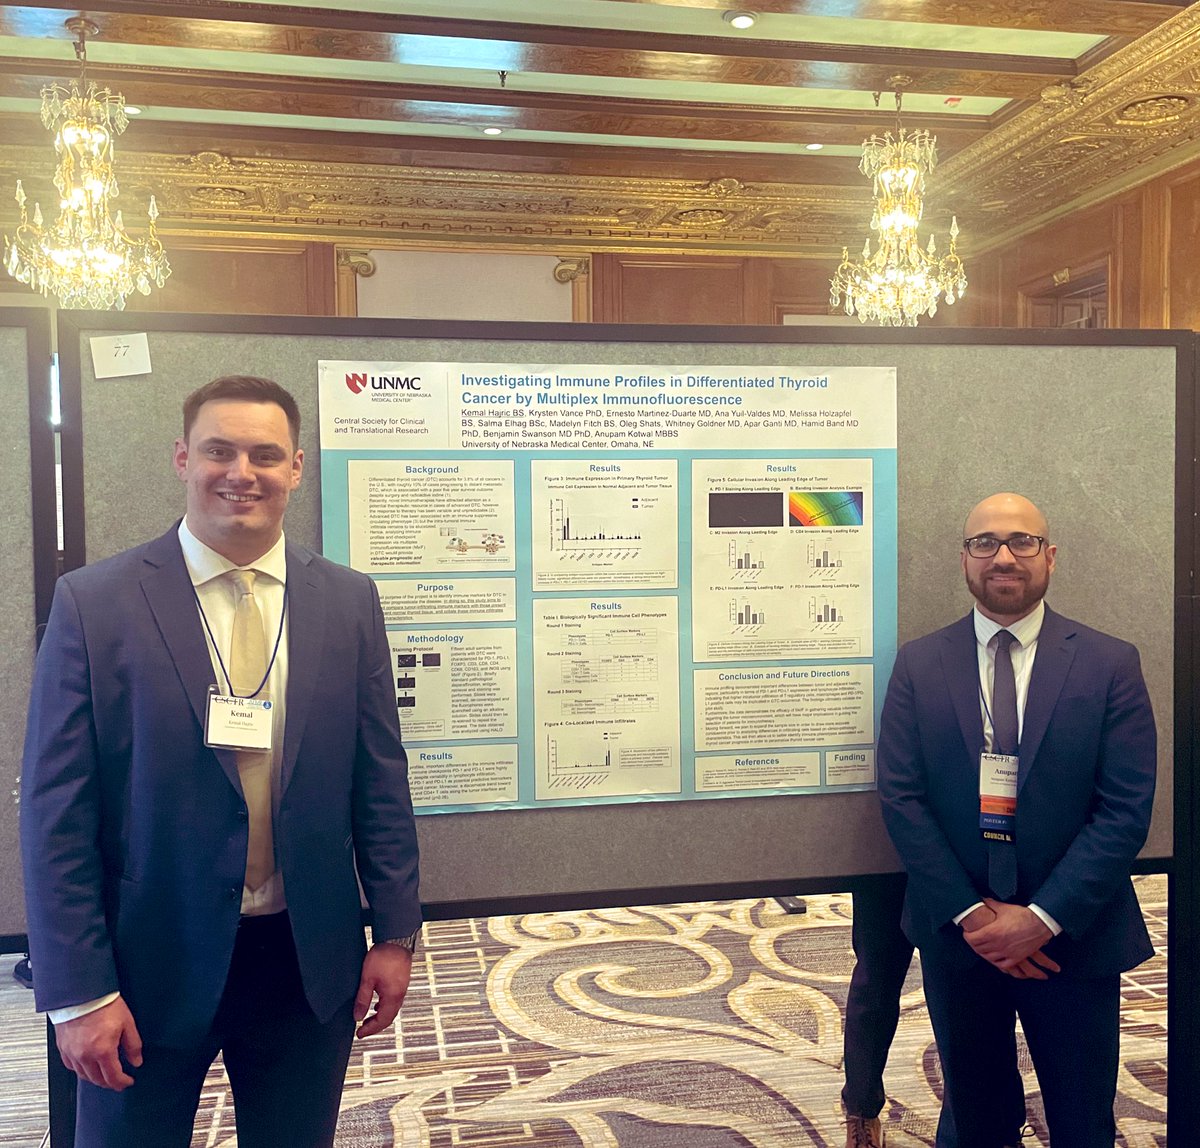 Proud moment mentoring undergraduate students in my #thyroidcancer #translational #research team presenting findings at Midwest Clinical and Translational Research Meeting @CSCTR_org @AFMResearch @unmc_research @UNMC_IM @UnmcDem @UNMCCOM